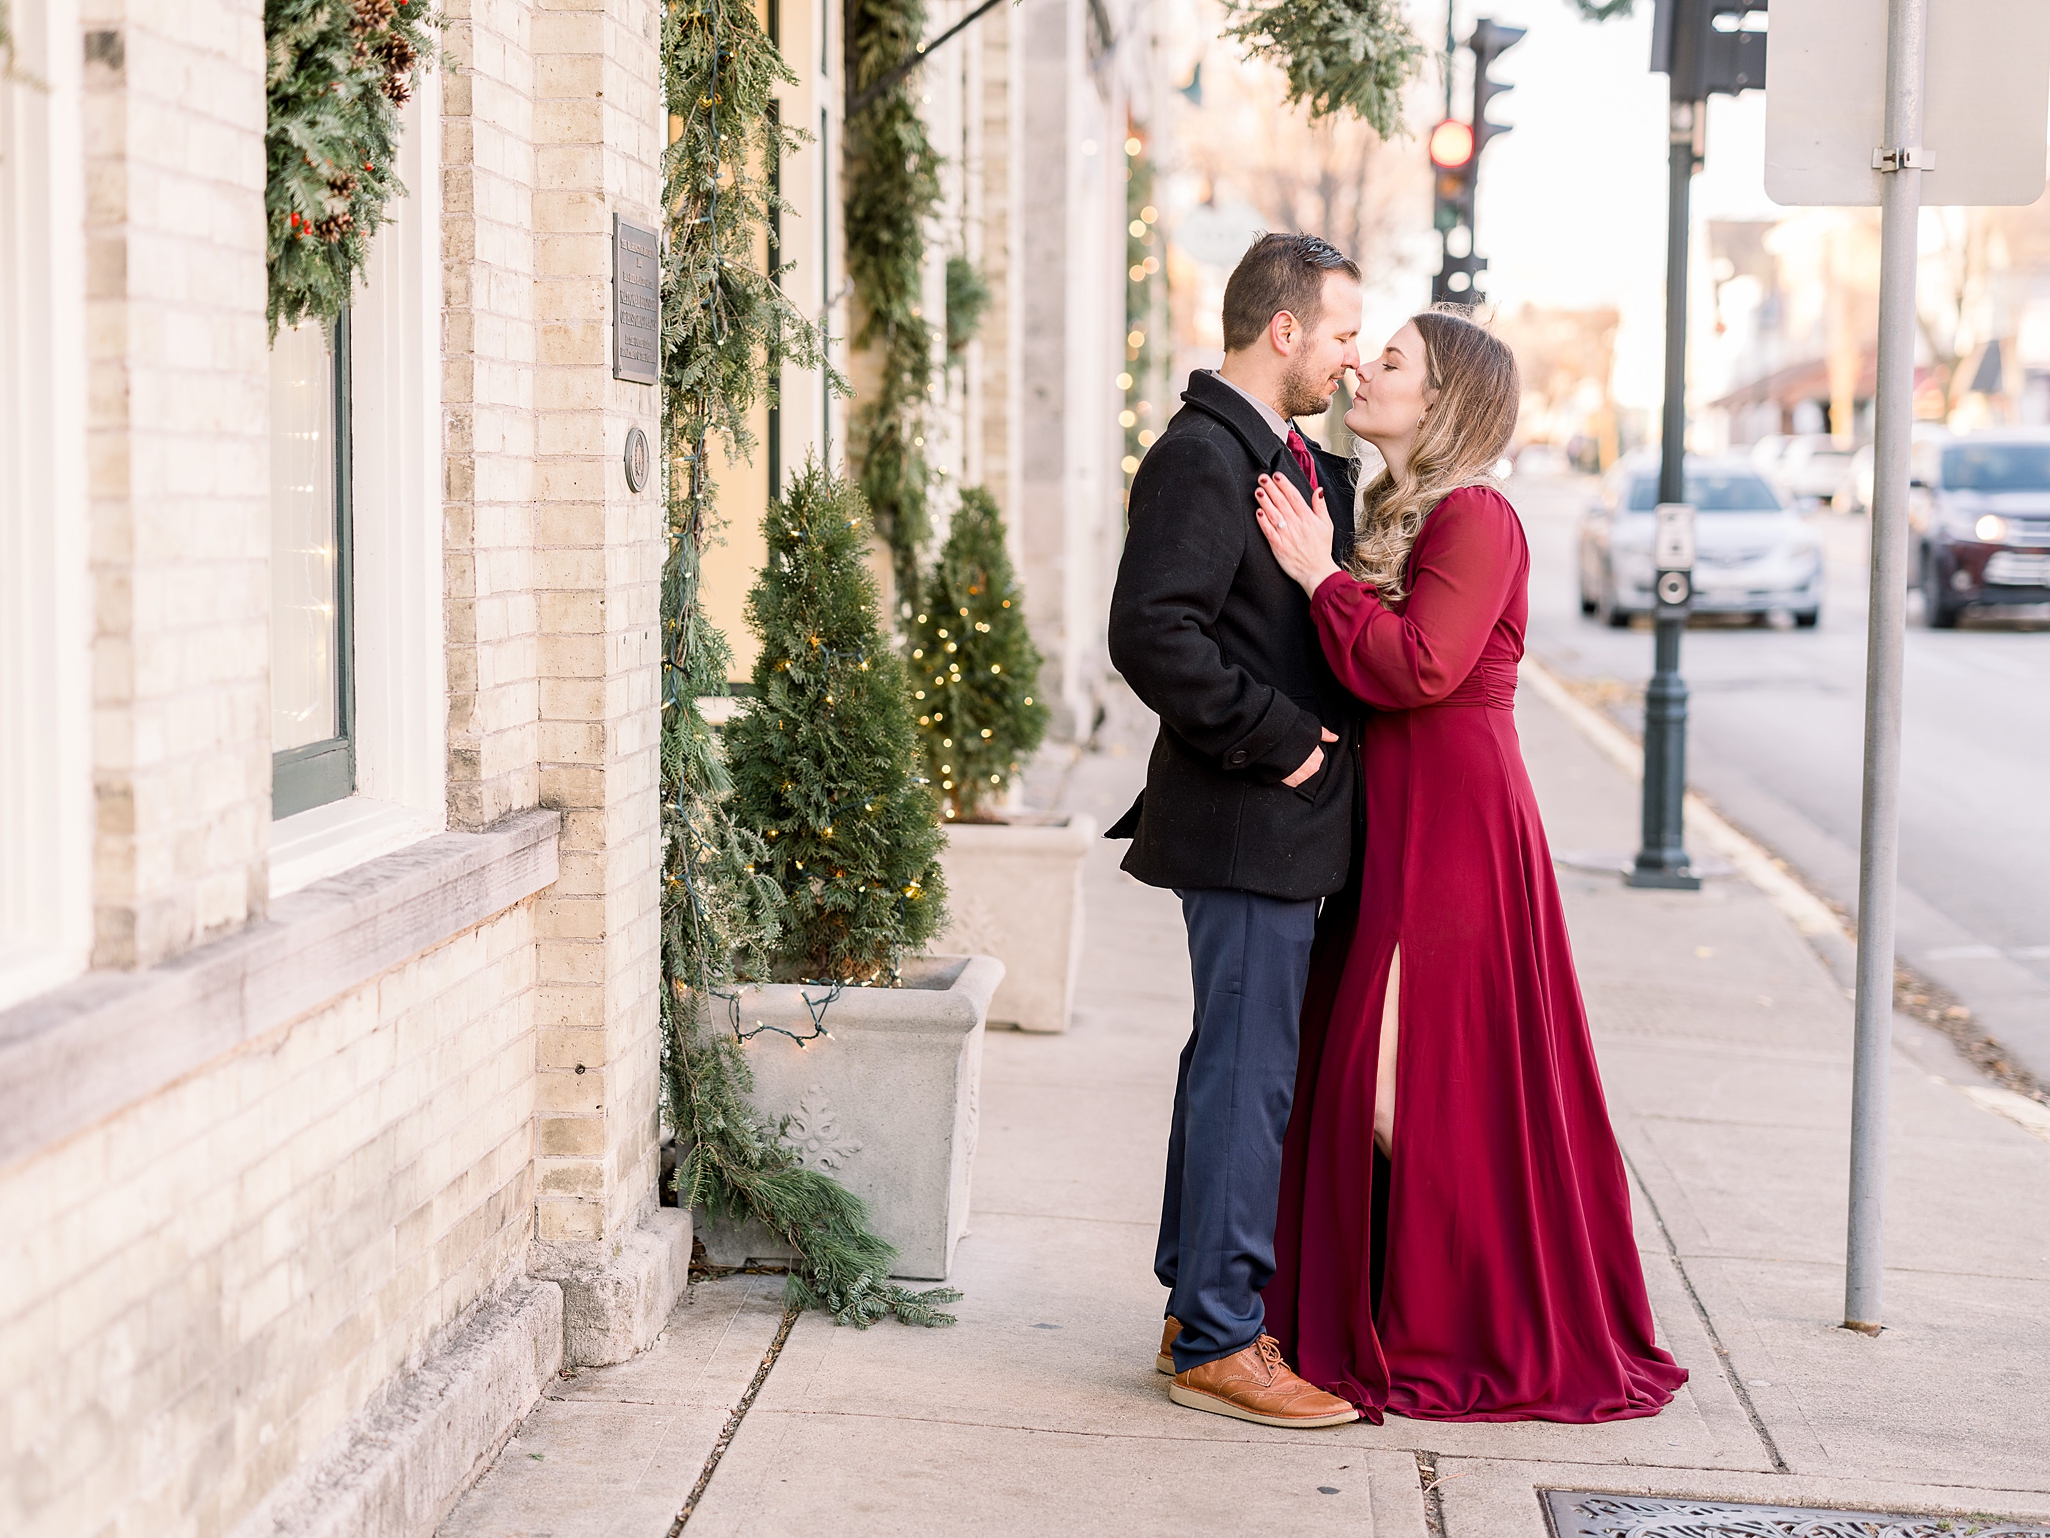 Downtown Cedarburg, WI Winter Engagement Session